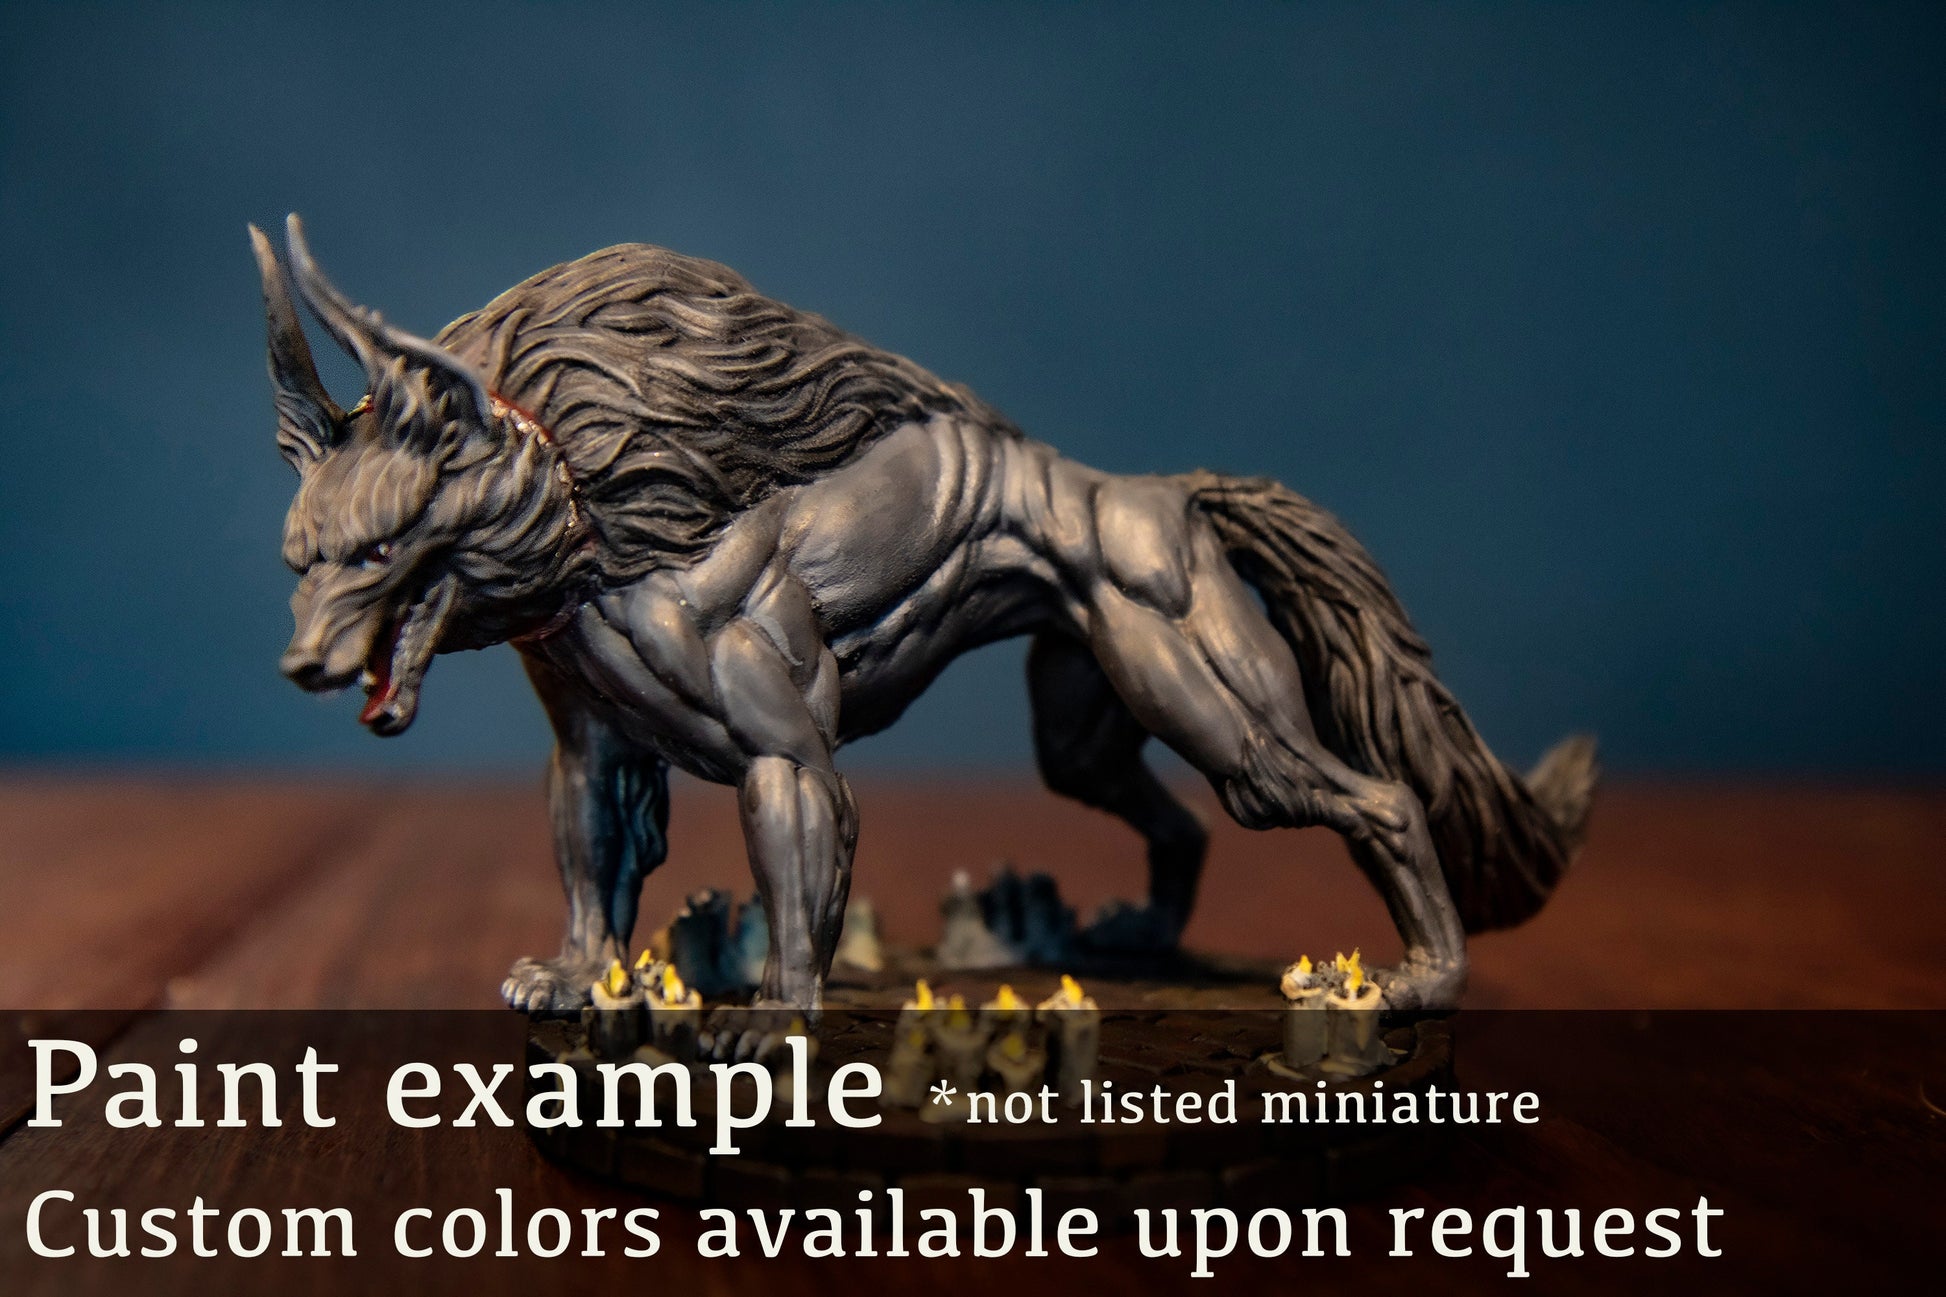 Mh'azhounds - Cast n Play Printed Miniature | Dungeons & Dragons | Pathfinder | Tabletop